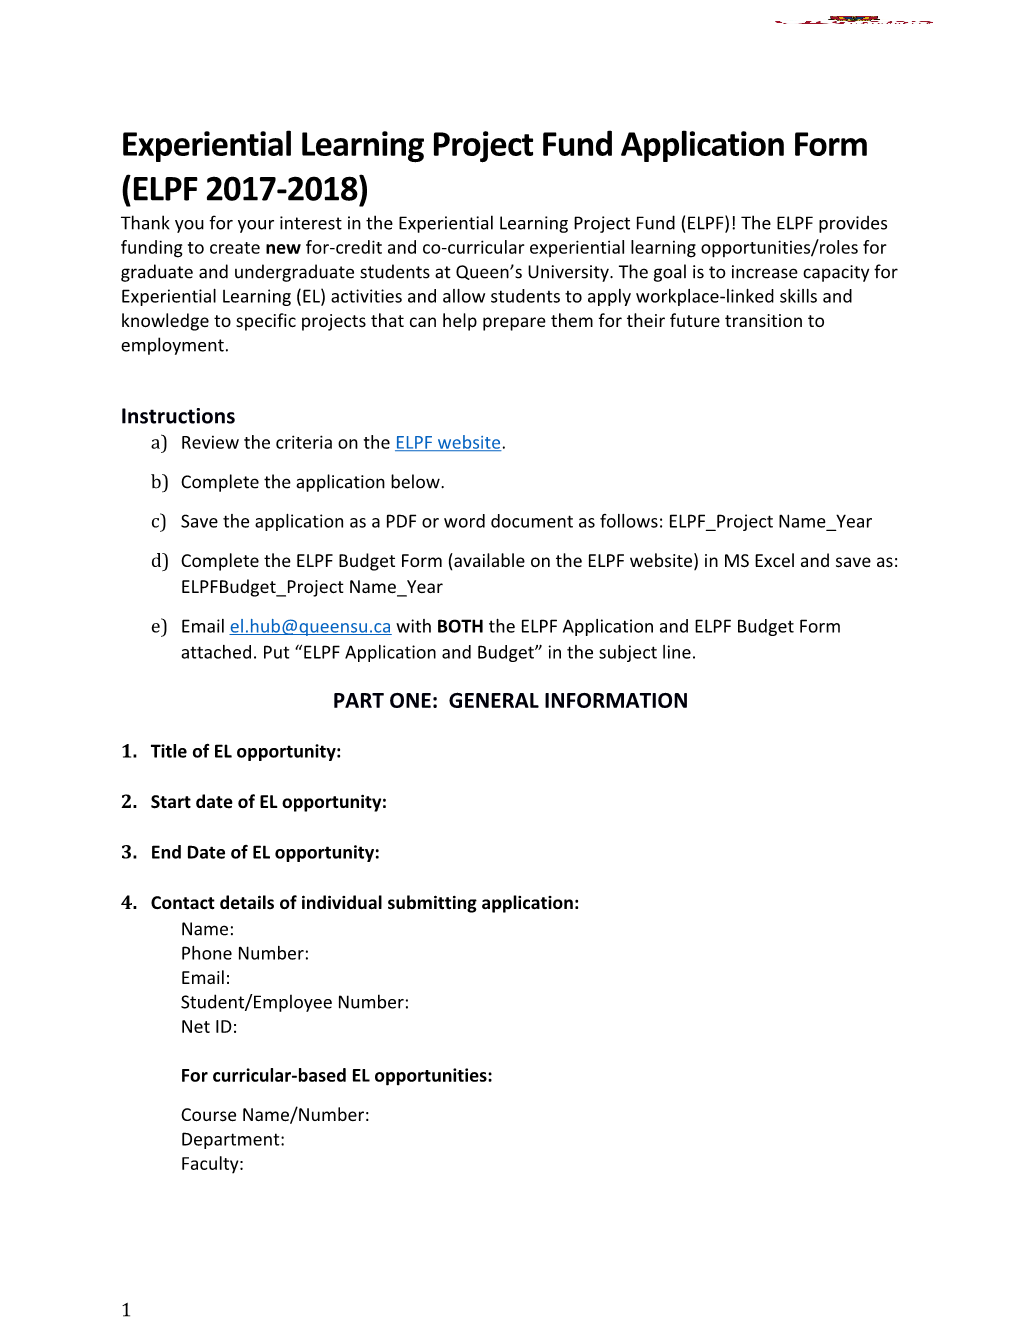 Experiential Learning Project Fund Application Form (ELPF 2017-2018)